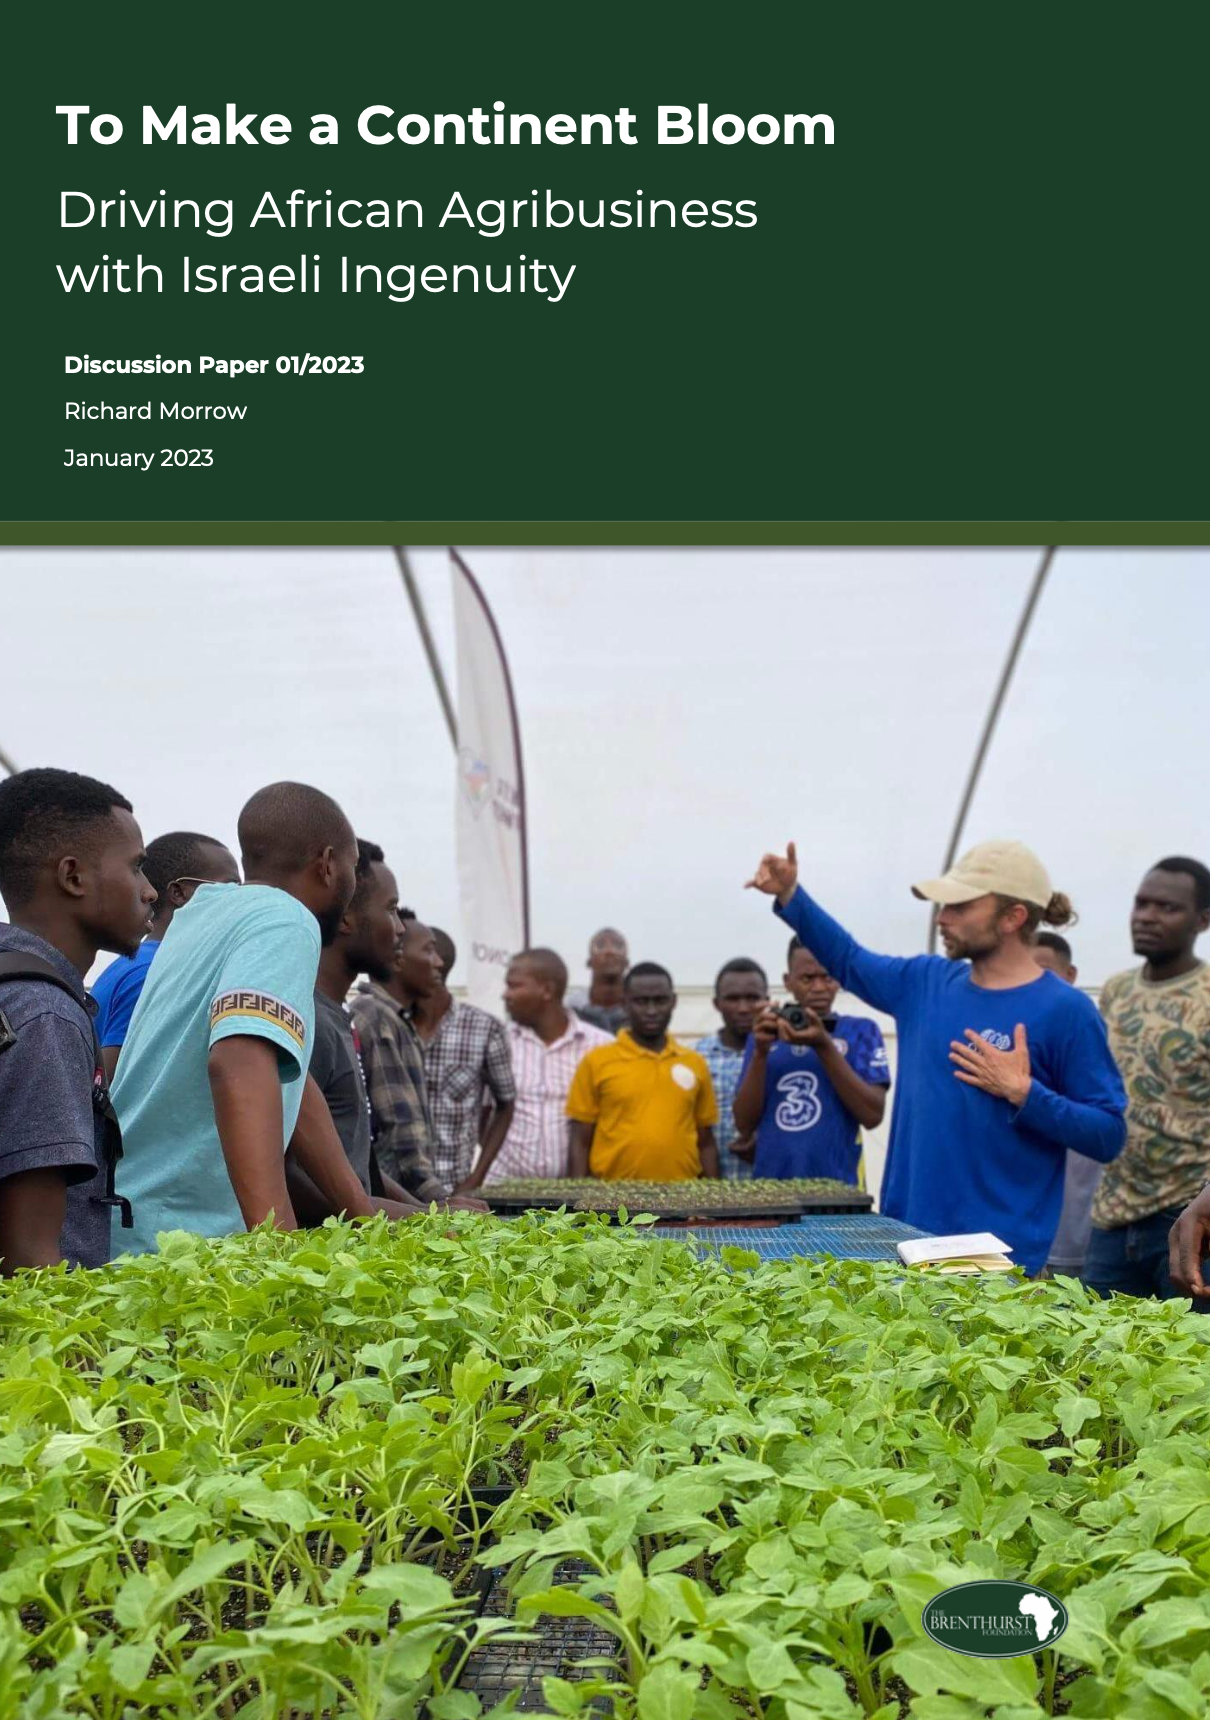 To Make a Continent Bloom: Driving African Agribusiness with Israeli Ingenuity